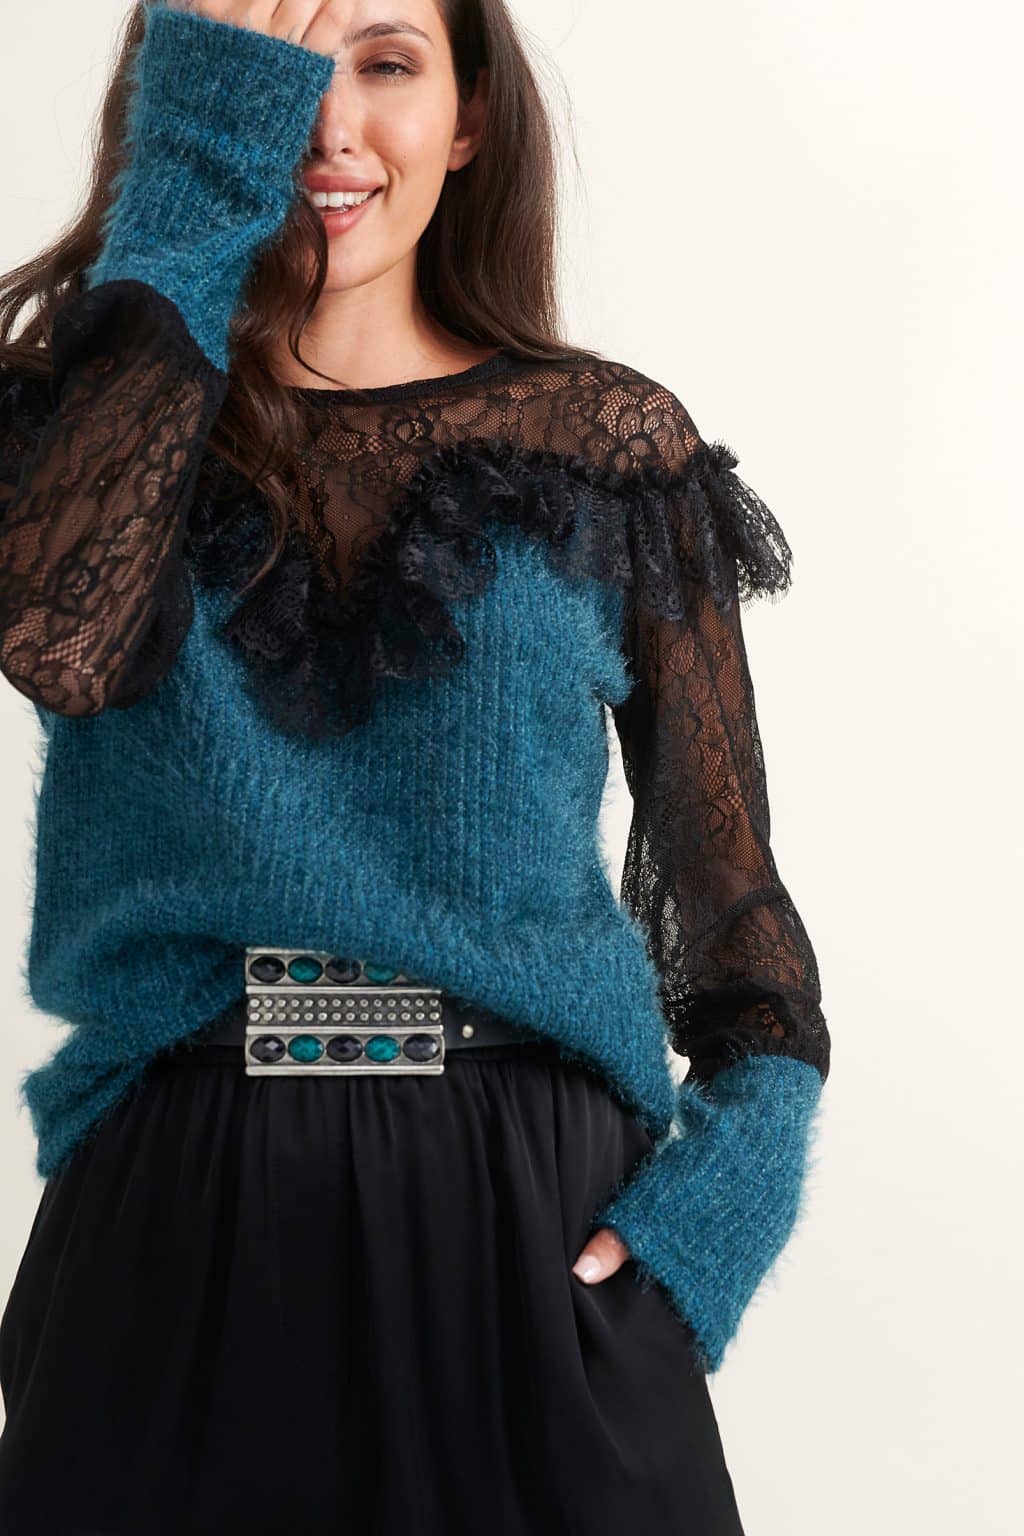 Clothing LACE KNITTED SWEATER